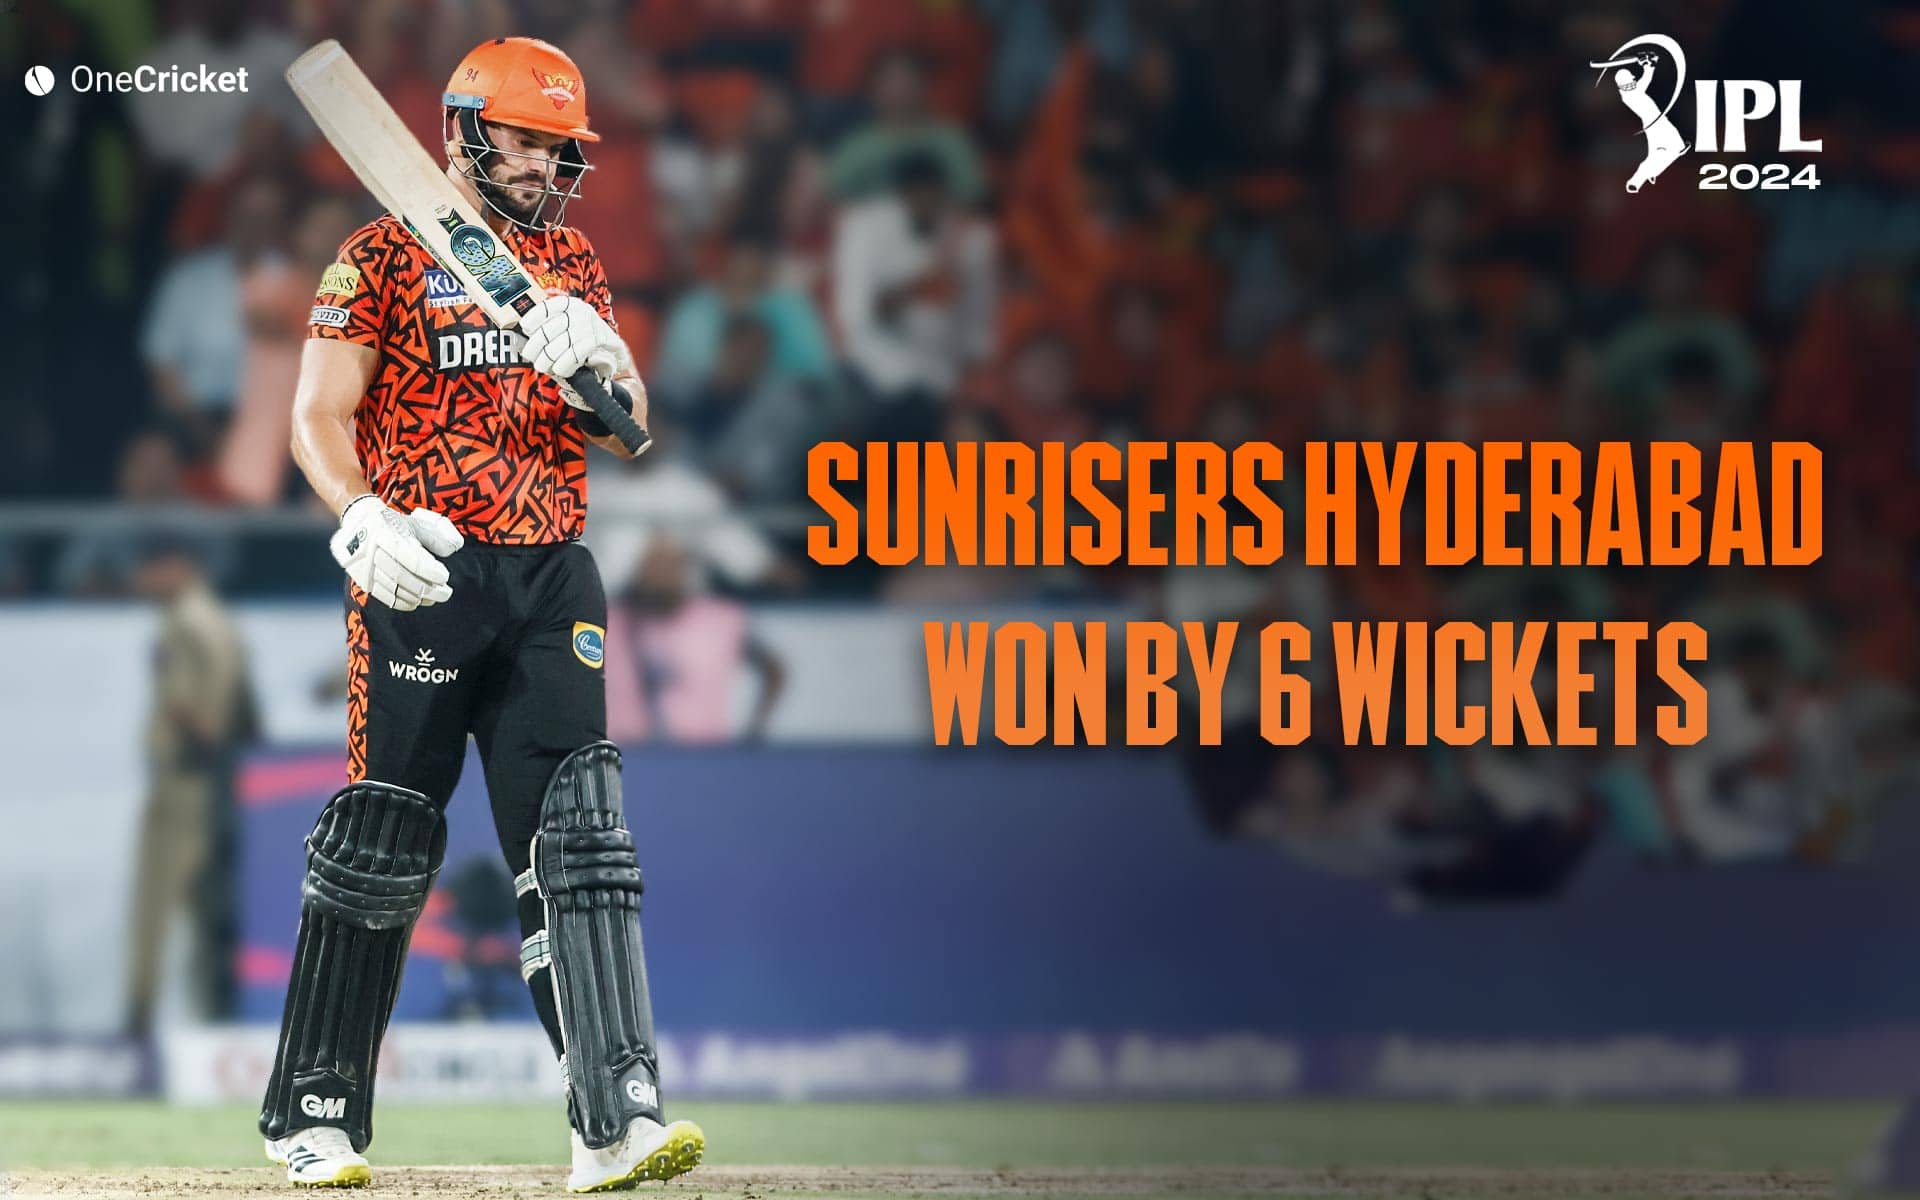 SRH defeats CSK by 6 wickets (OneCricket)
